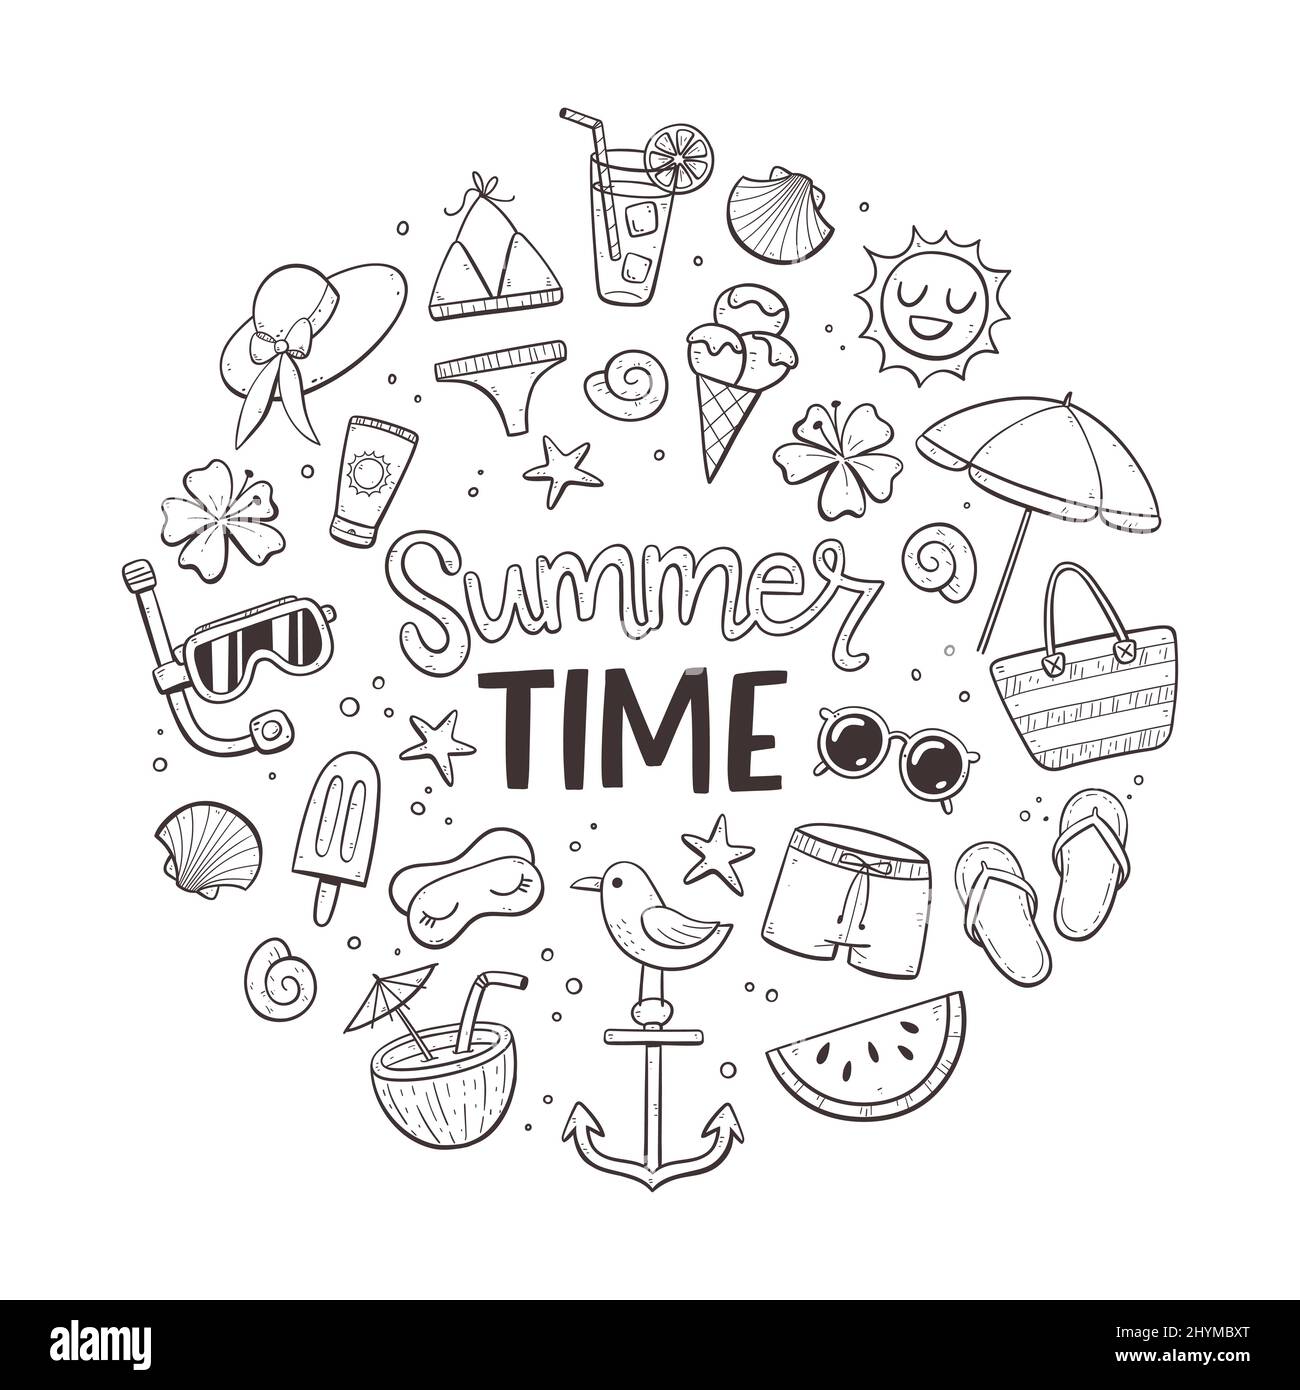 Summer Time background. Doodle style. Cute hand drawn summer icons. Isolated objects on white background. Stock Vector